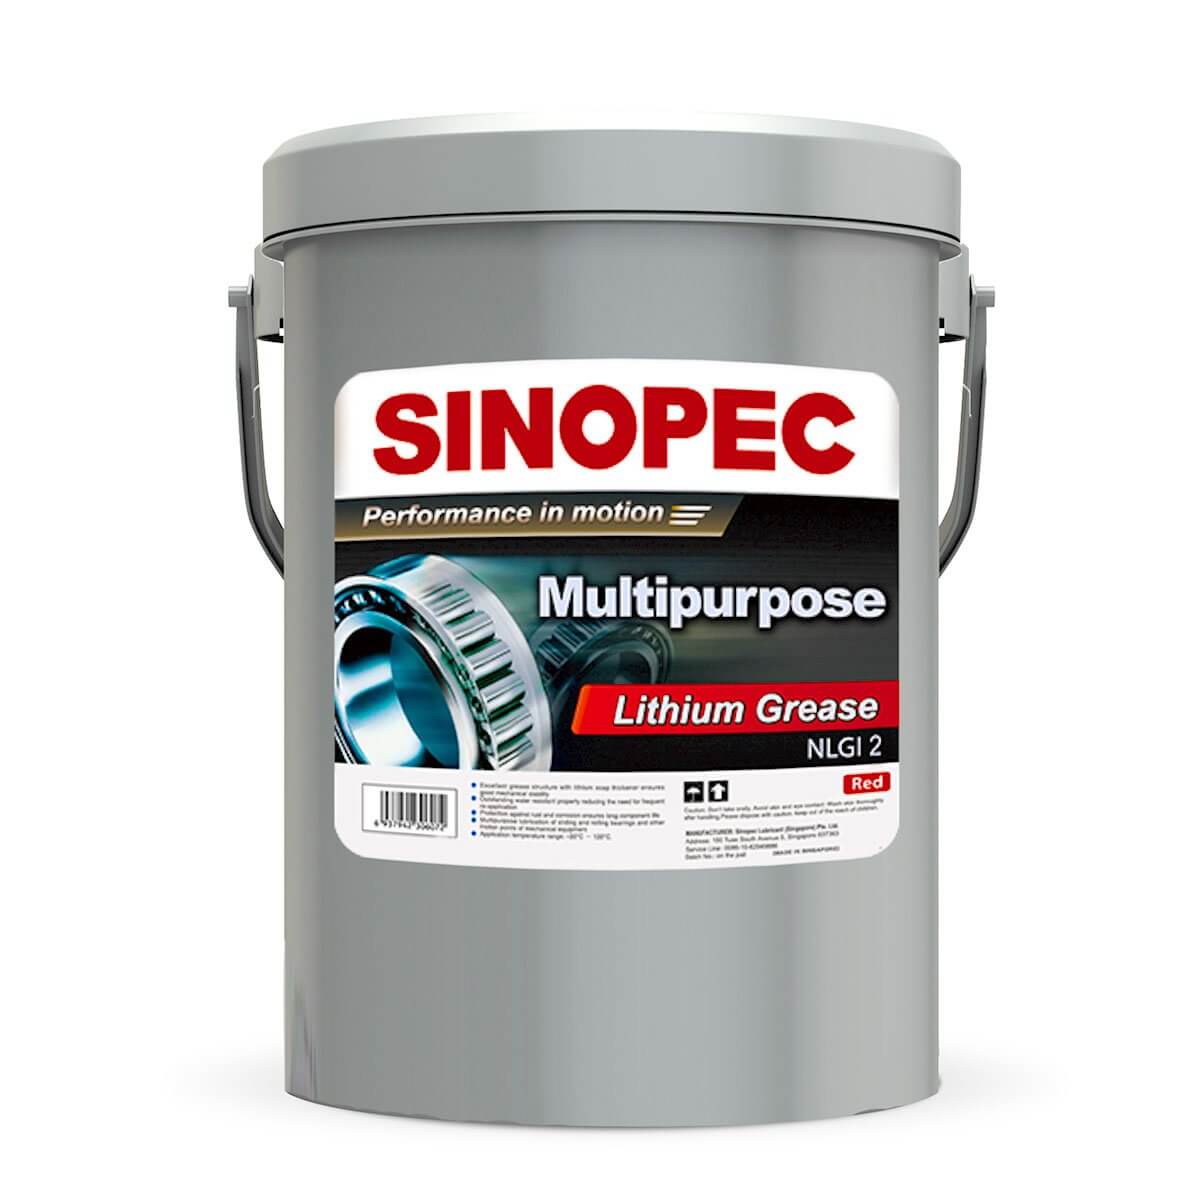 Red Lithium Multi-purpose Grease #2-SINOPEC-35lb red lithium grease,Brand_Sinopec,Category_Grease,Grade_NLGI 2,red lithium grease,SHELL GADUS S3 V220C 2,SHELL GADUS S3 V220C 2 GREASE,sinopec,Size_35 LB Pail,Type_Red Grease